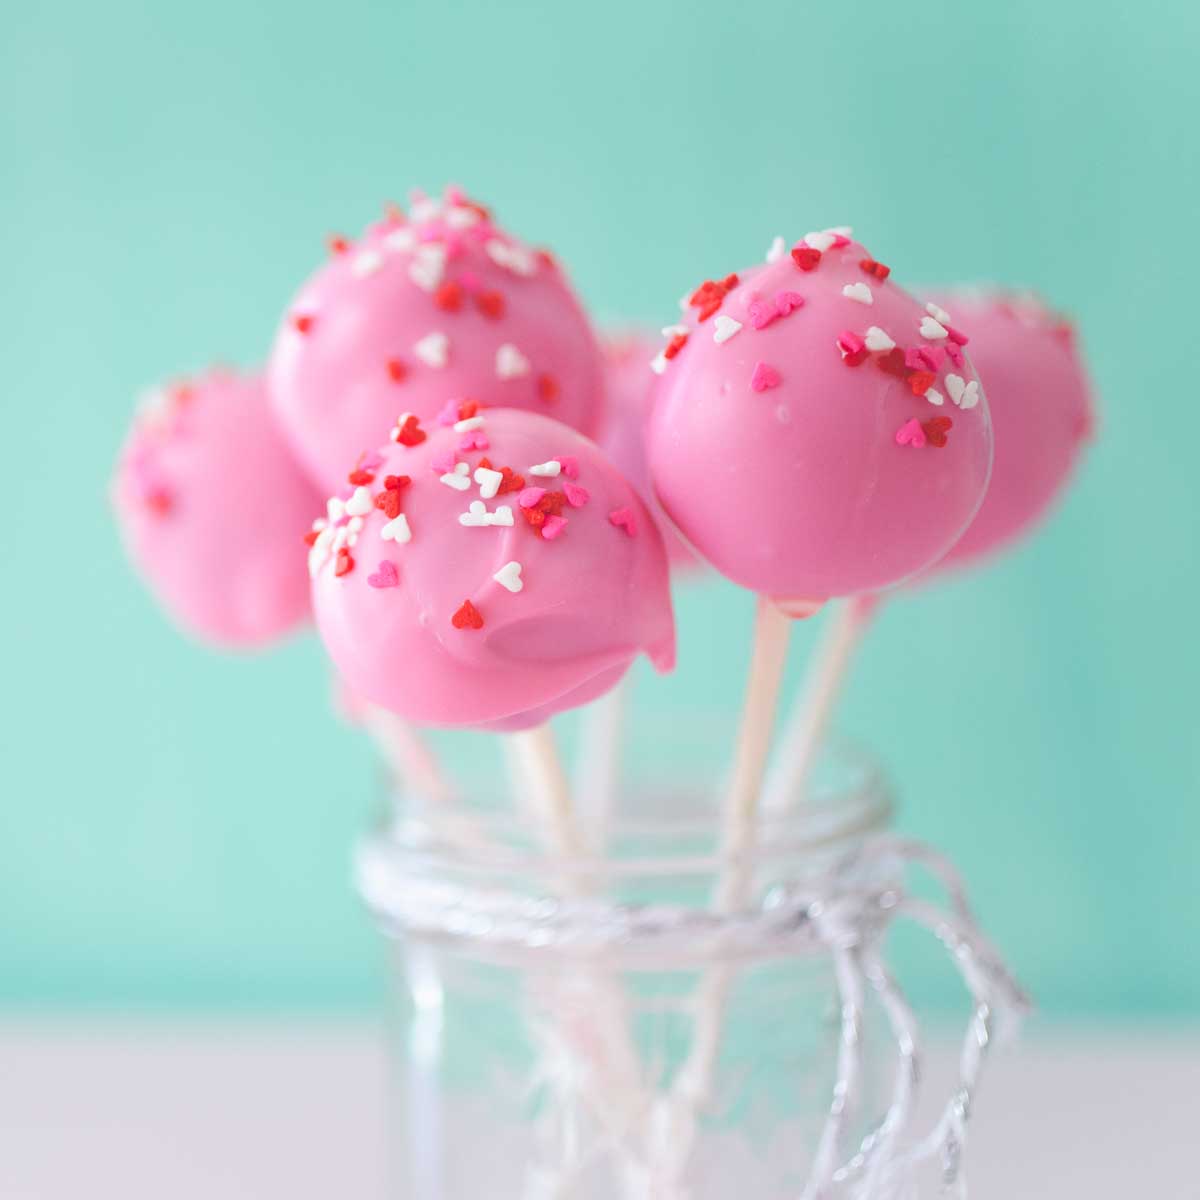 A mason jar filled with pink brownie pops on white sticks with red and white sprinkles.